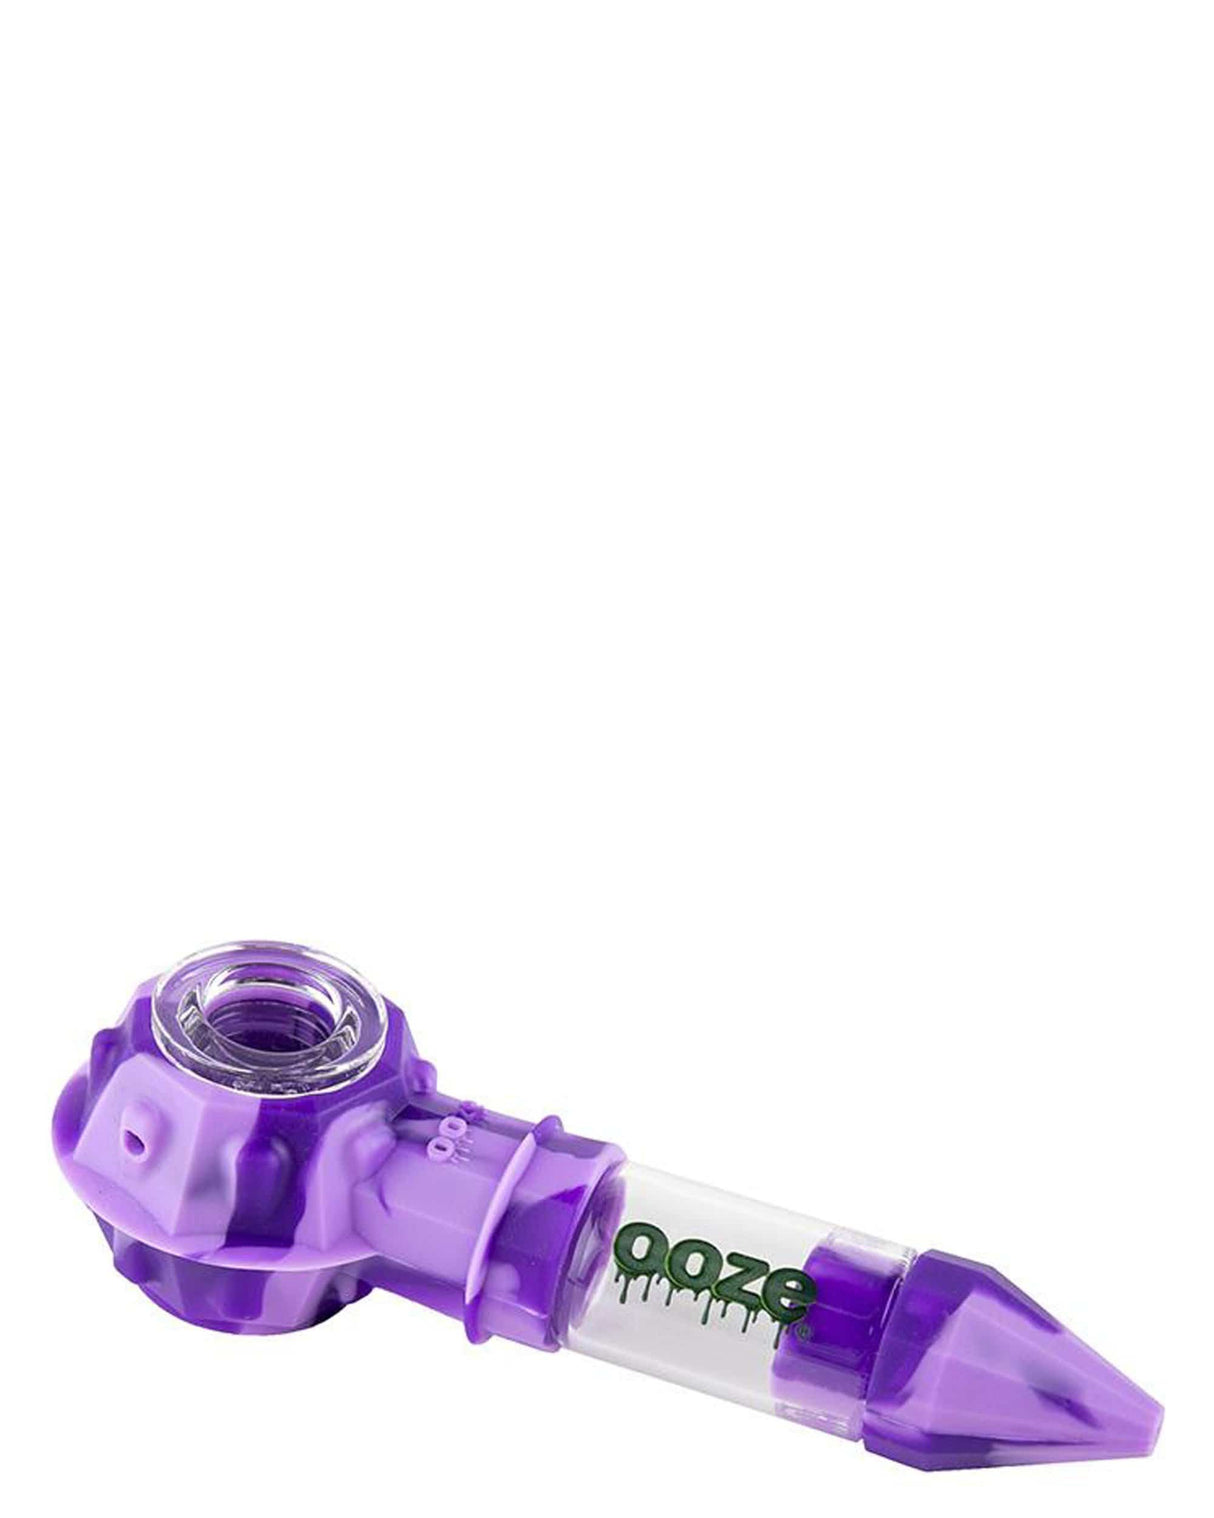 Ooze Bowser Silicone Pipe in Purple - Durable 4" Spoon Design for Dry Herbs, Side View